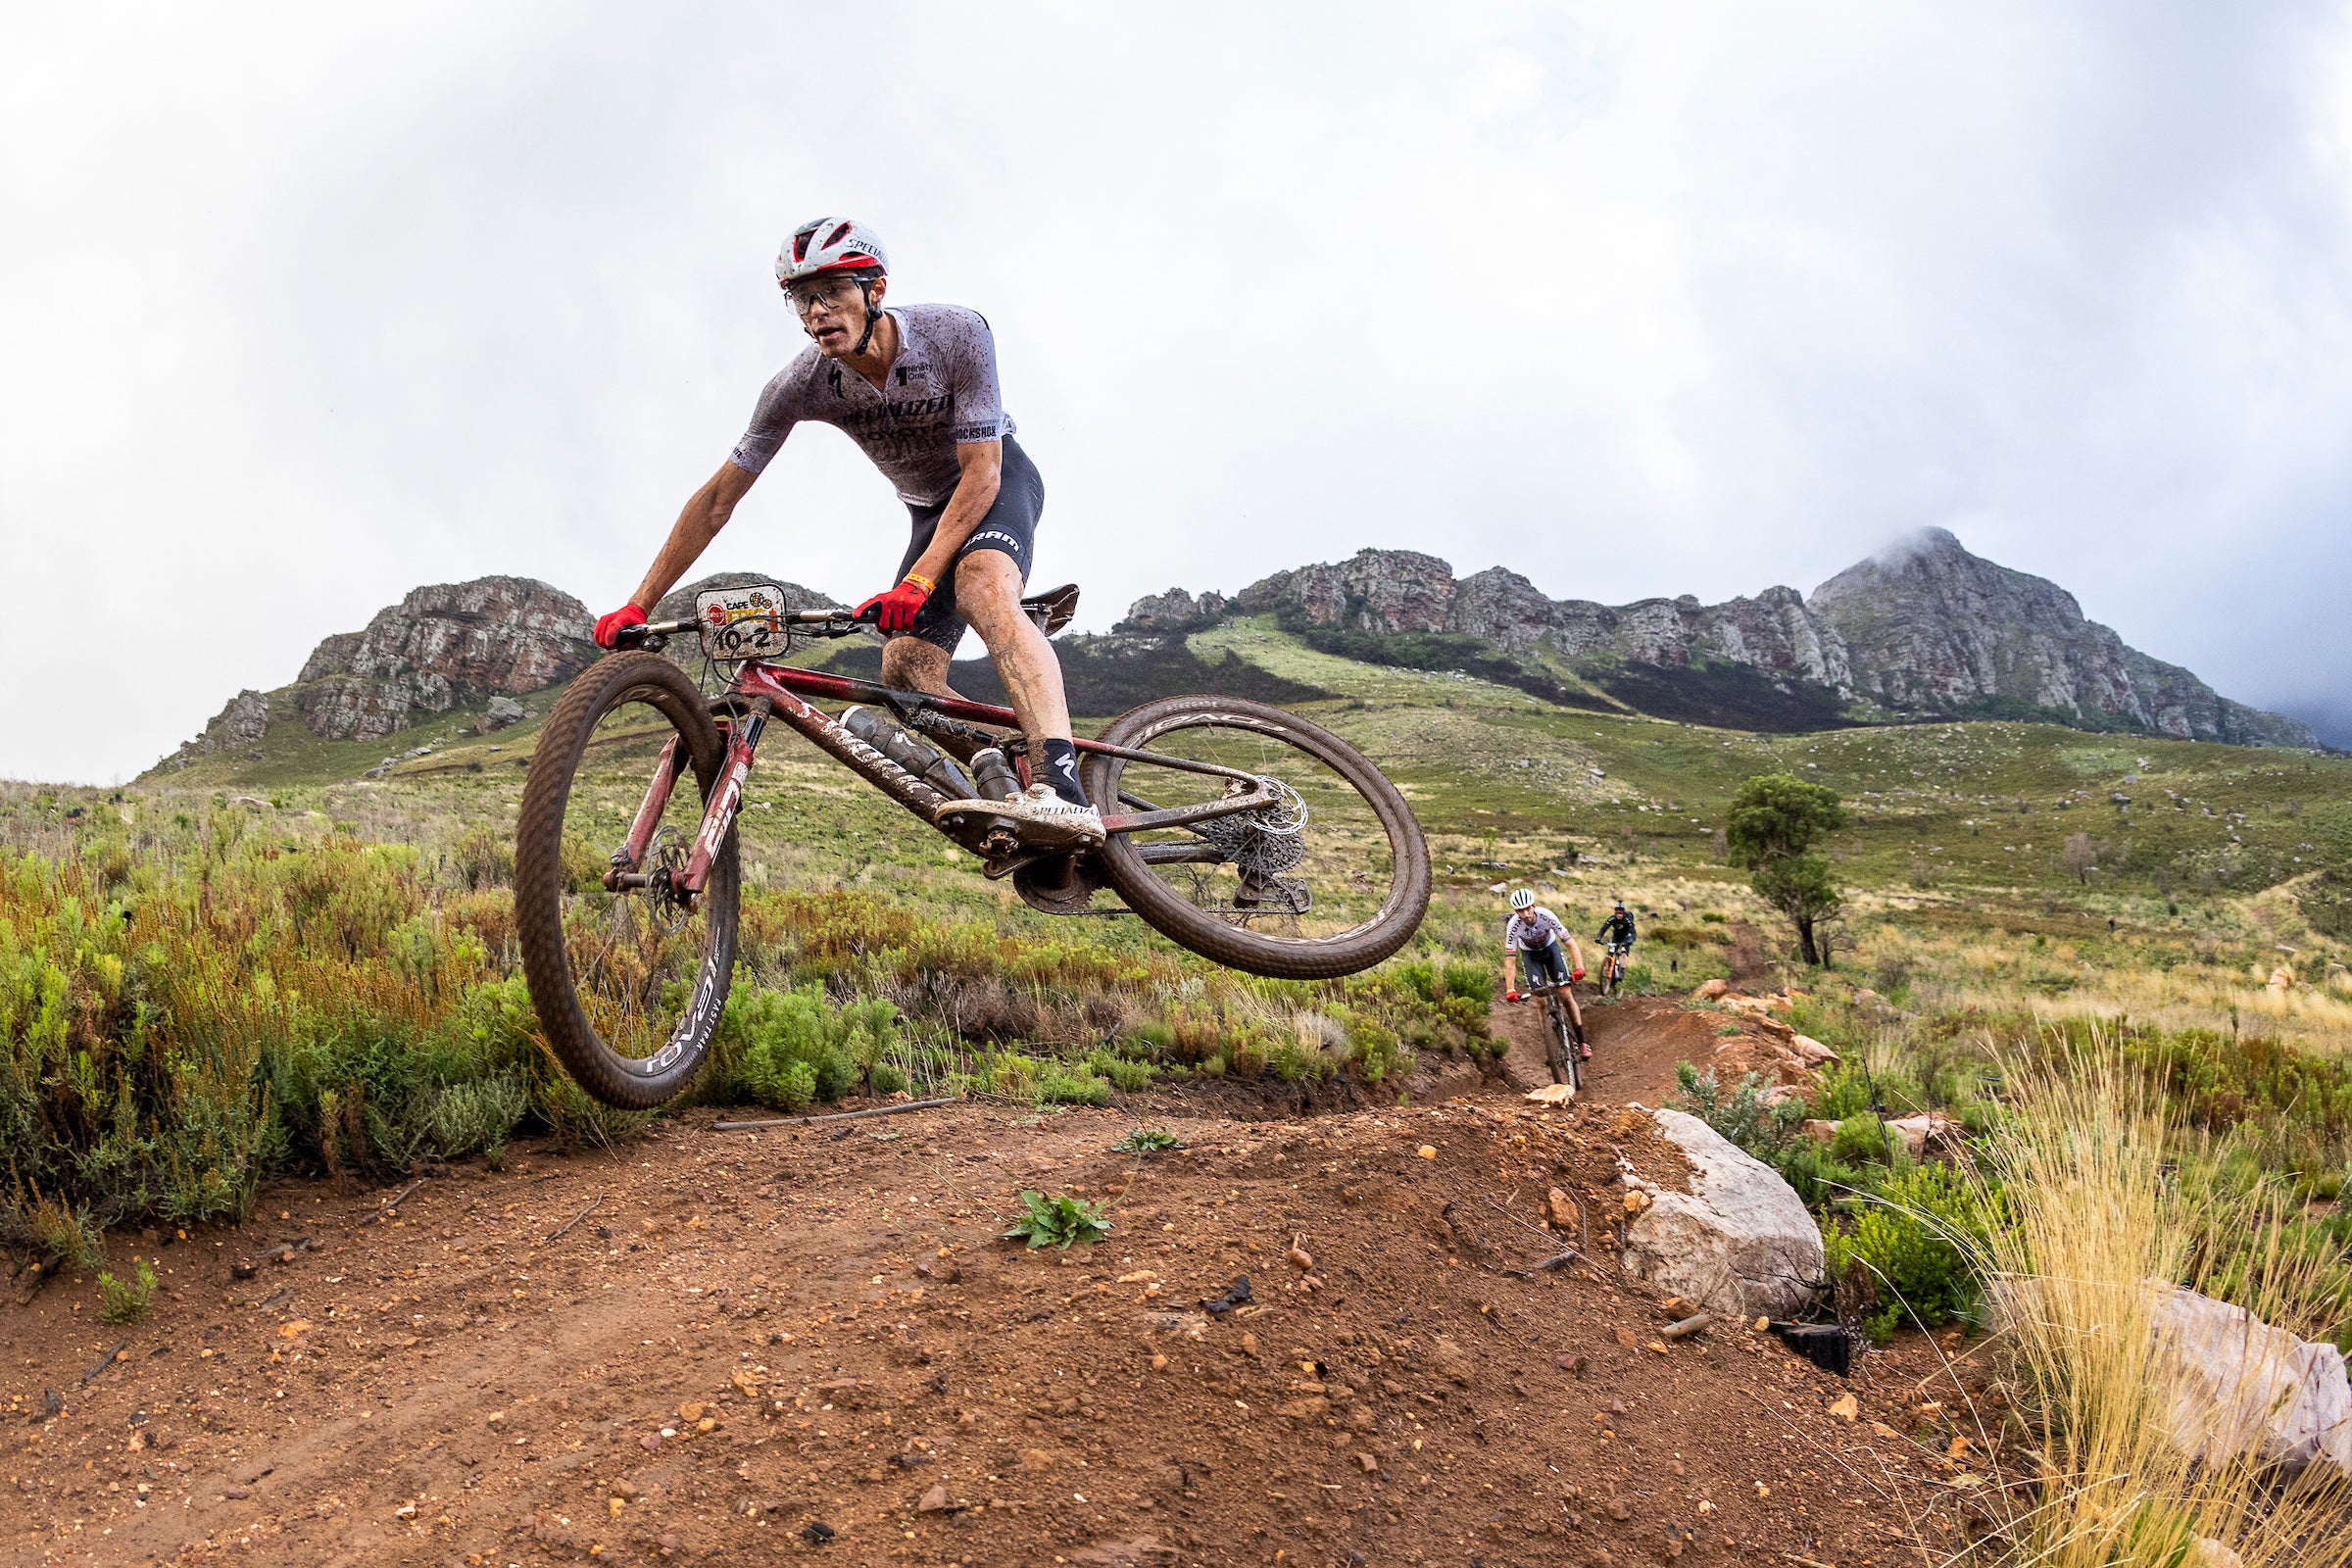 Cape Epic stage 6 Blevins and Beers inch closer to overall lead